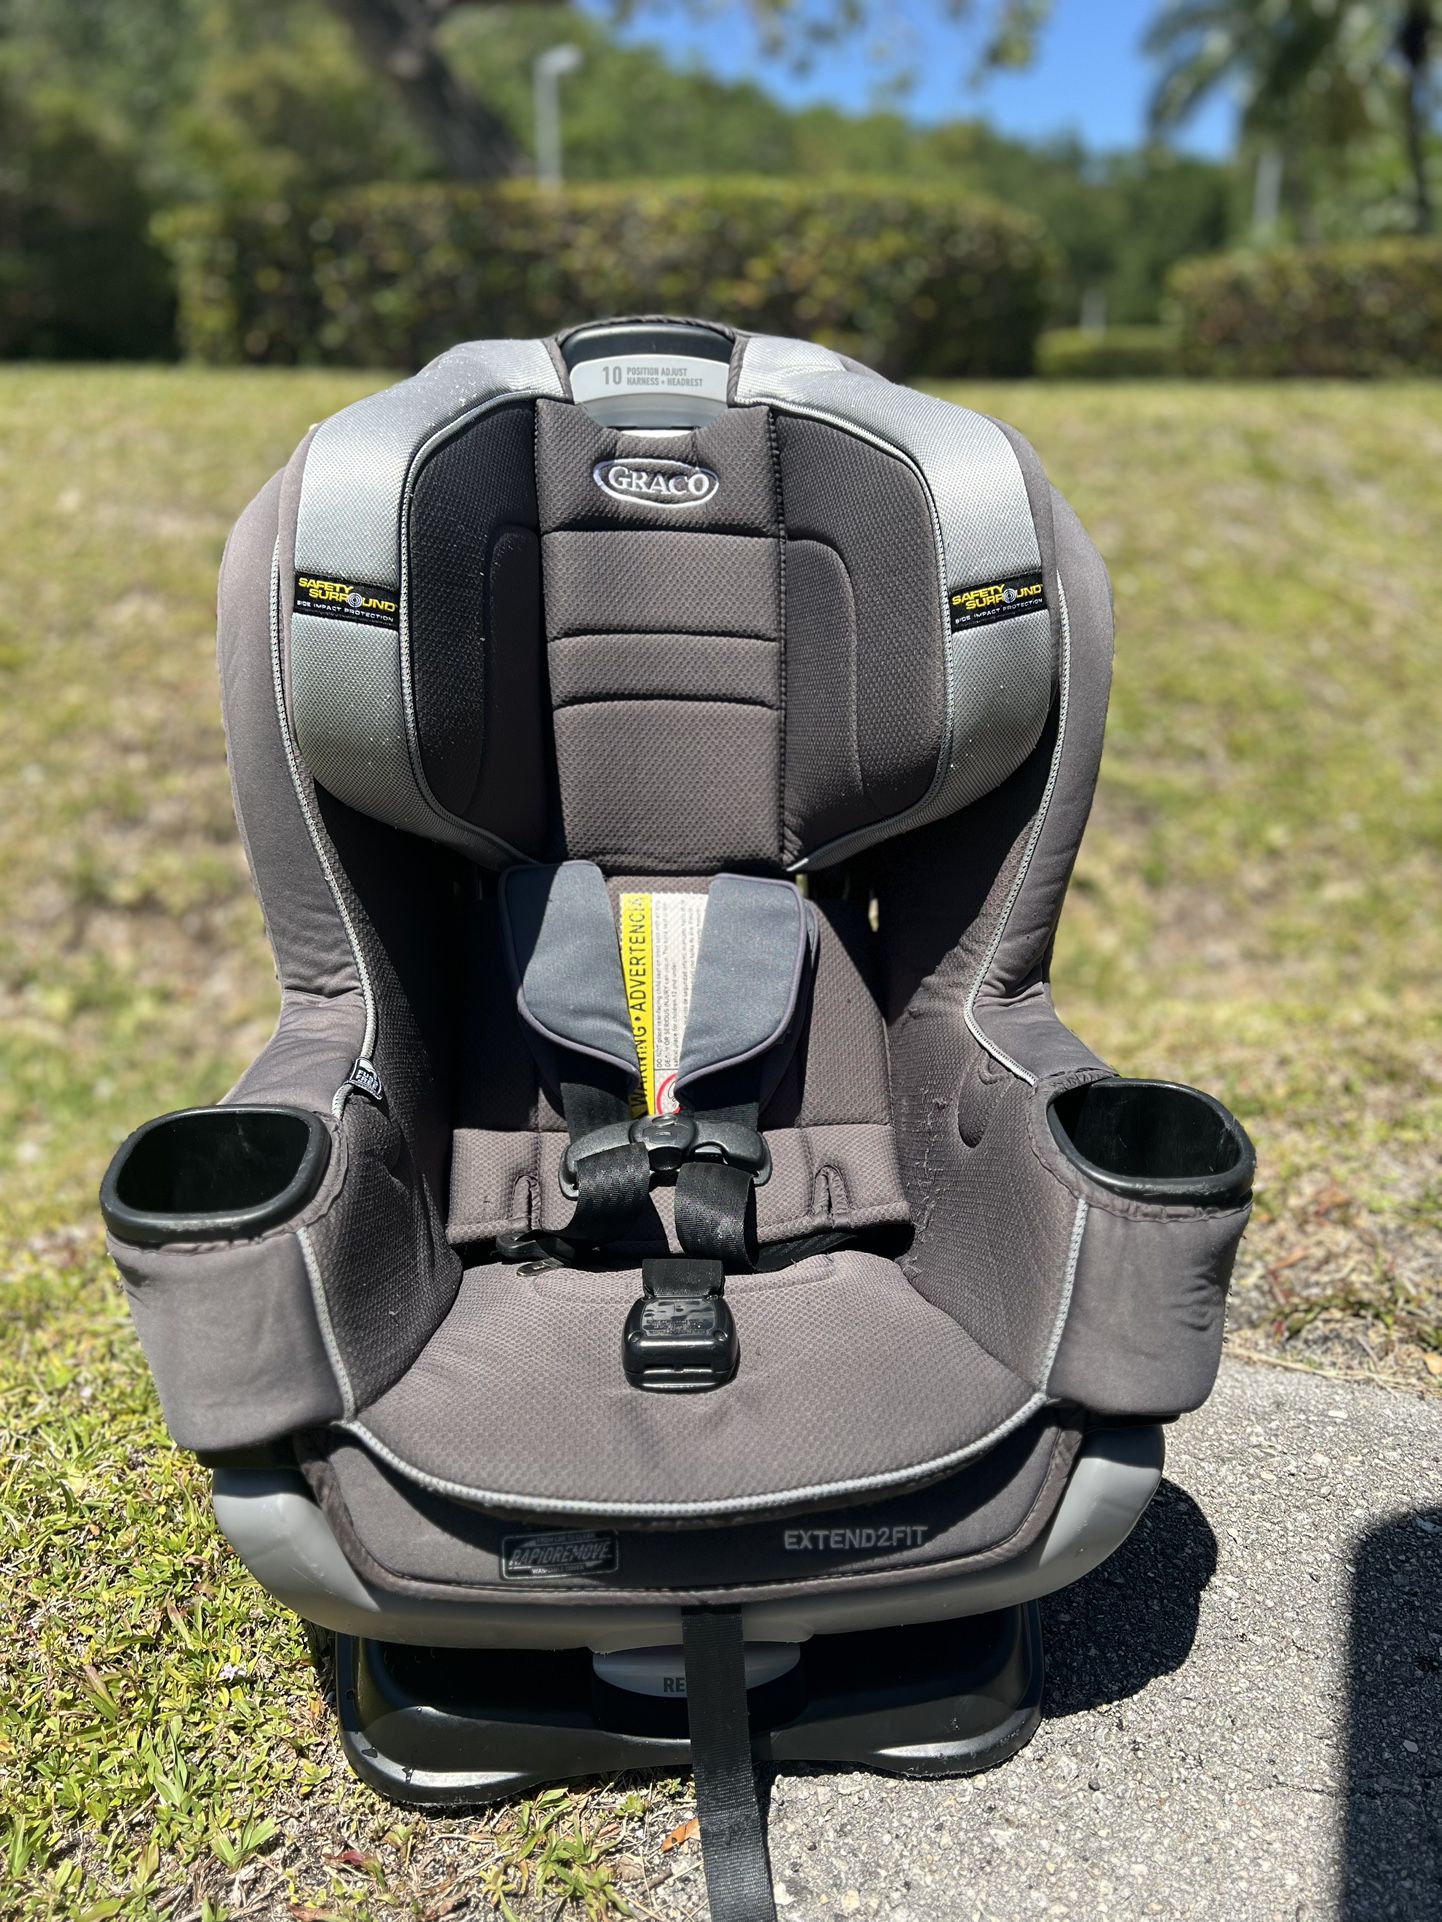 Graco Convertible car seat - Extend2Fit